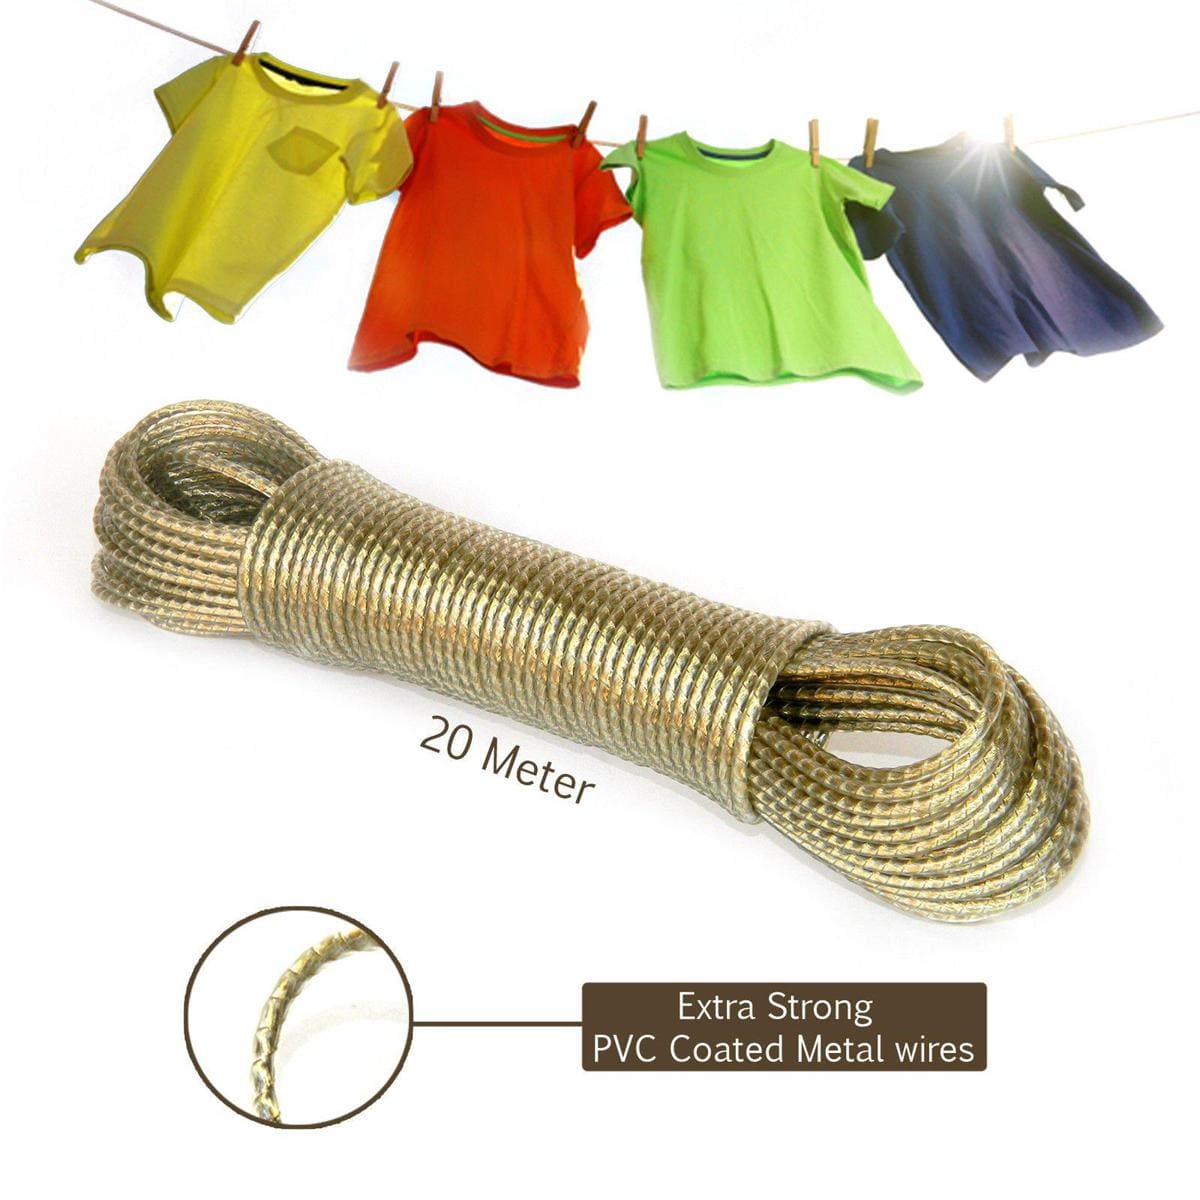 Metal Clothes Line, 20m Washing Line Rope, Steel Core Laundry Clothes Lines, Thick Strong Plastic PVC Cover Garden Indoor Outdoor Travel, Wall Mounted Laundry Drying String